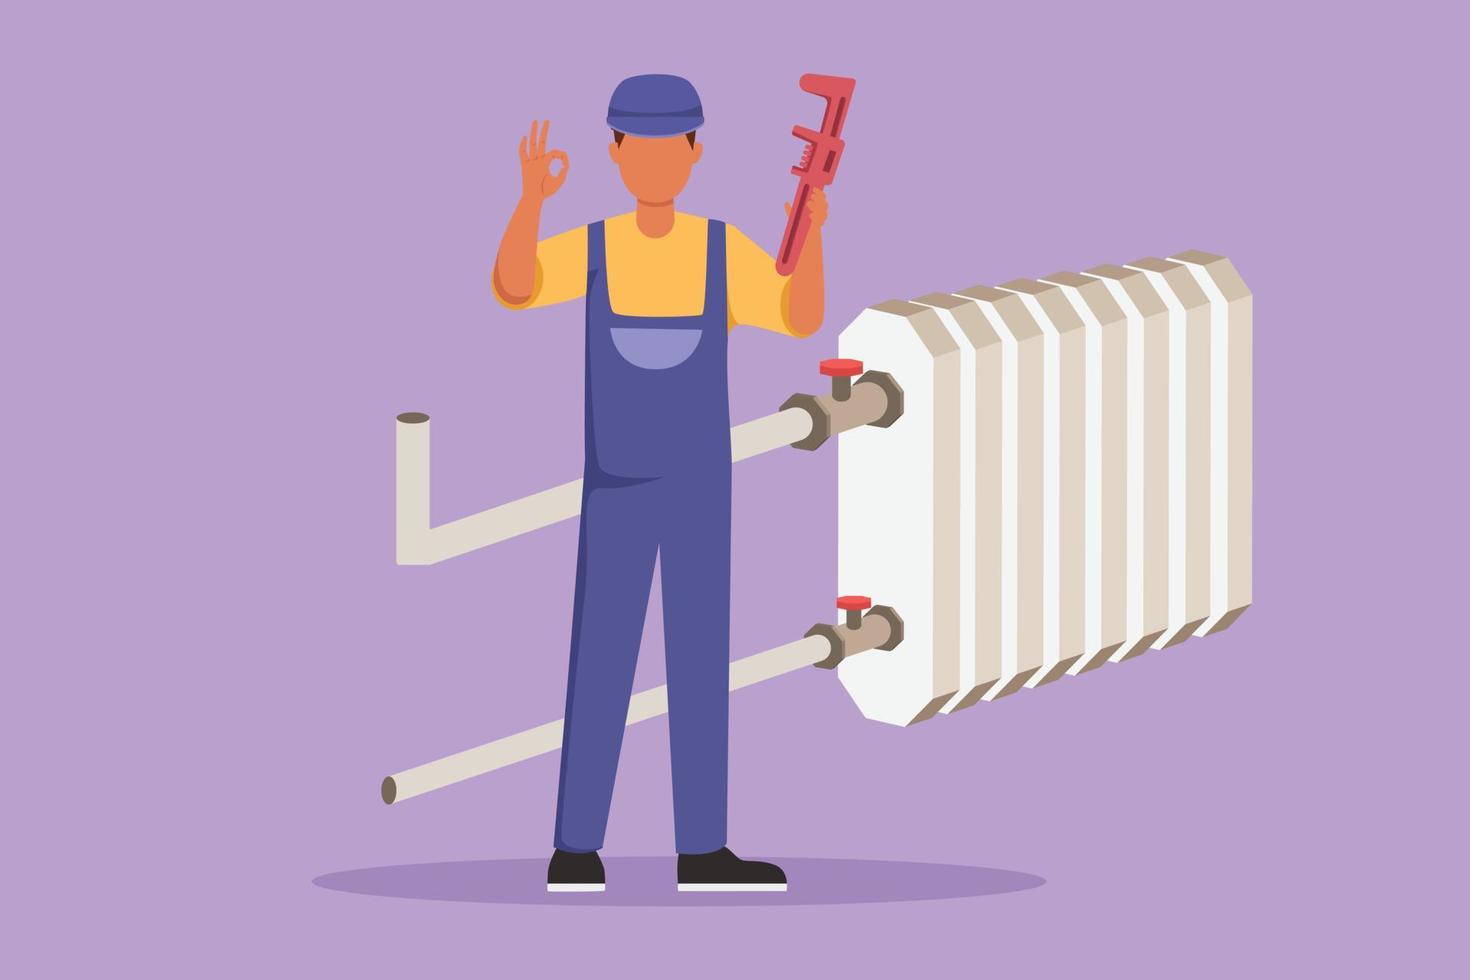 Graphic flat design drawing male plumber standing holding wrench with okay gesture was ready to work on repairing the leaking drain in the sink and the houses drains. Cartoon style vector illustration